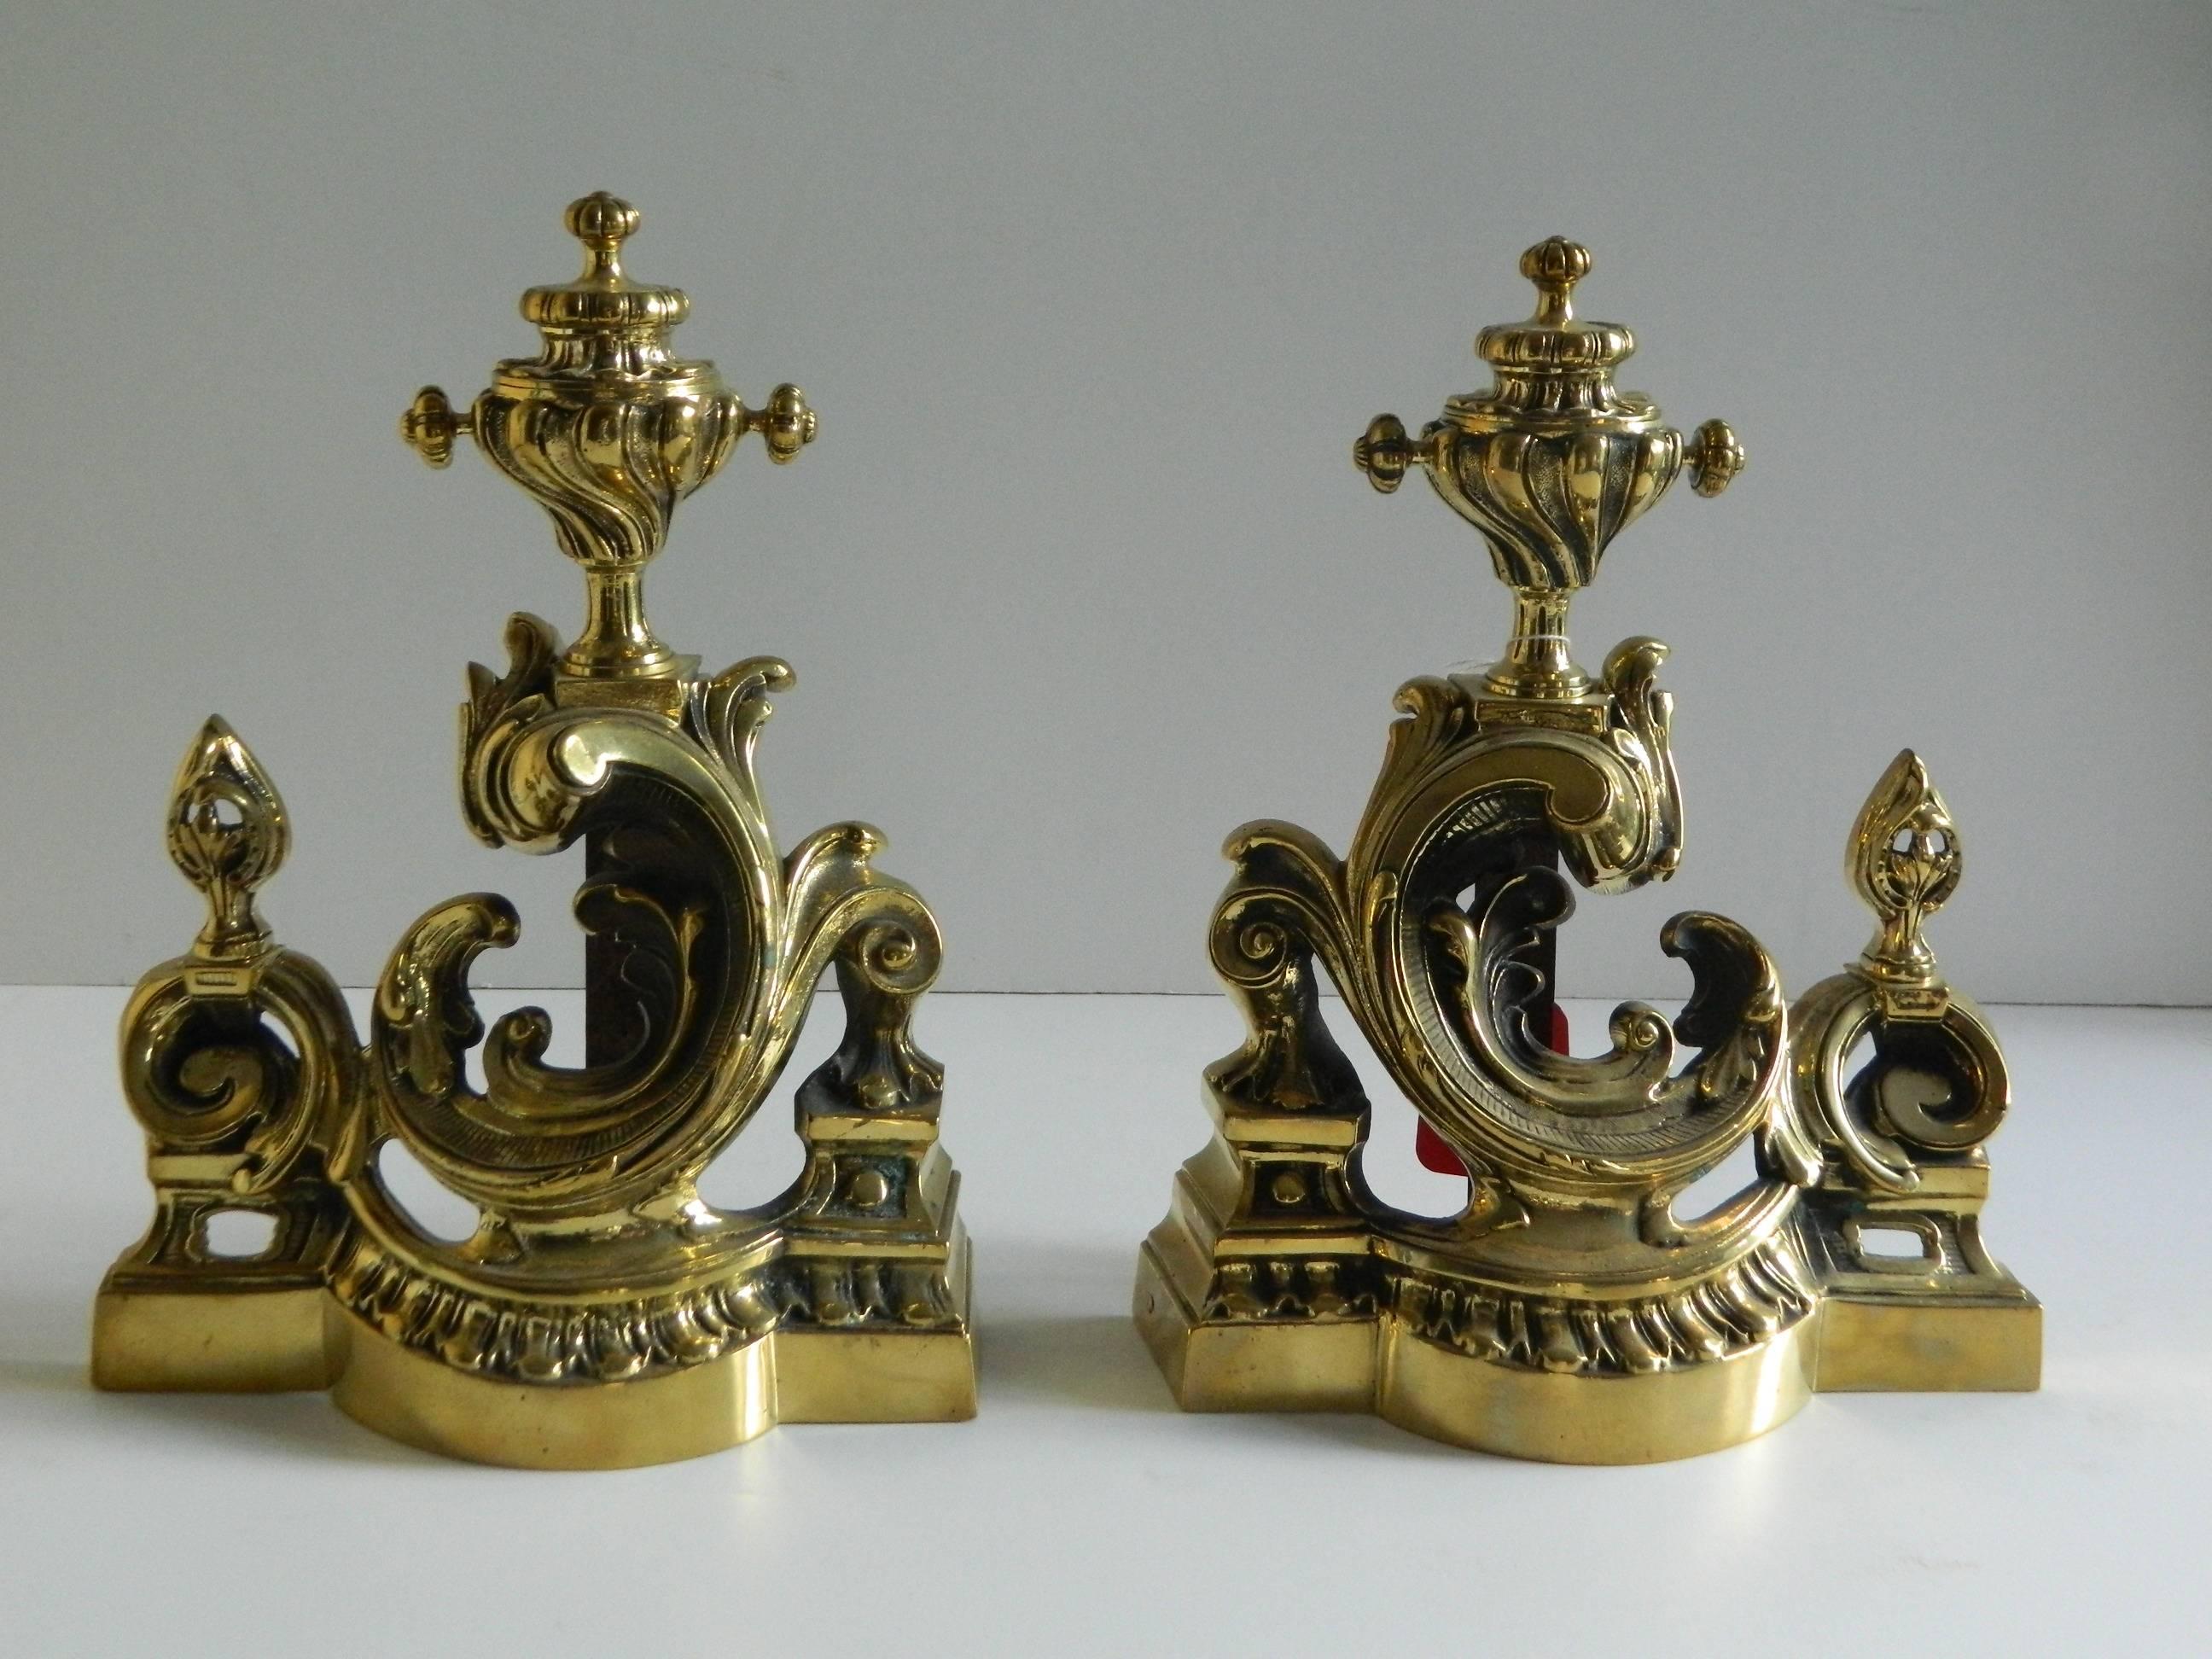 Pair of polished brass chenets or andirons - scroll motif, 19th century.
      